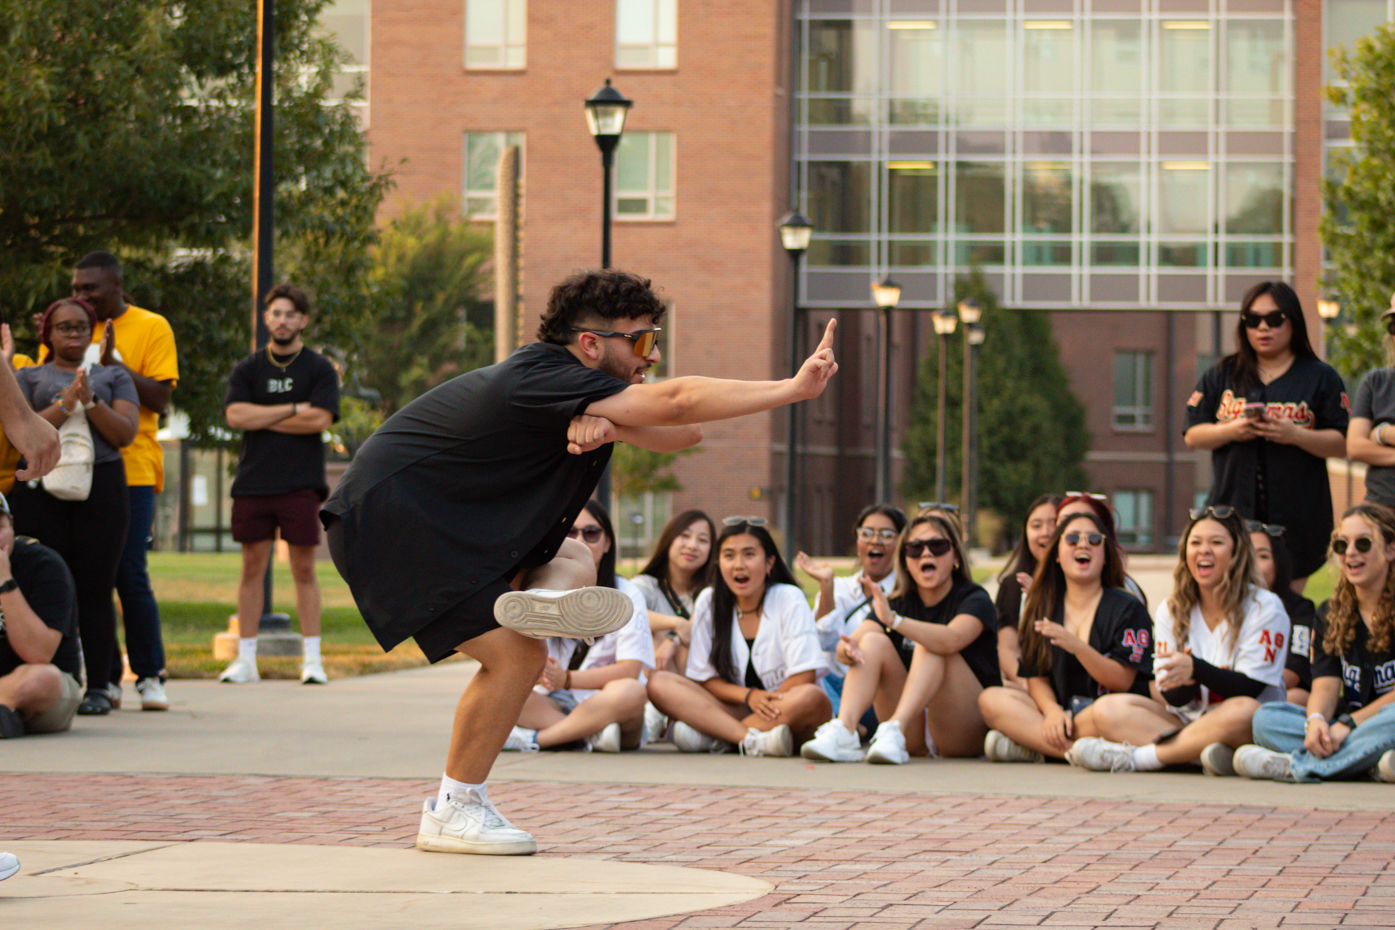 Andres Saenz performs the final move of the dance as the crowd cheers for him. Andres is apart of Sigma Lambda Beta where they performed at the Yard Show on Aug. 29.